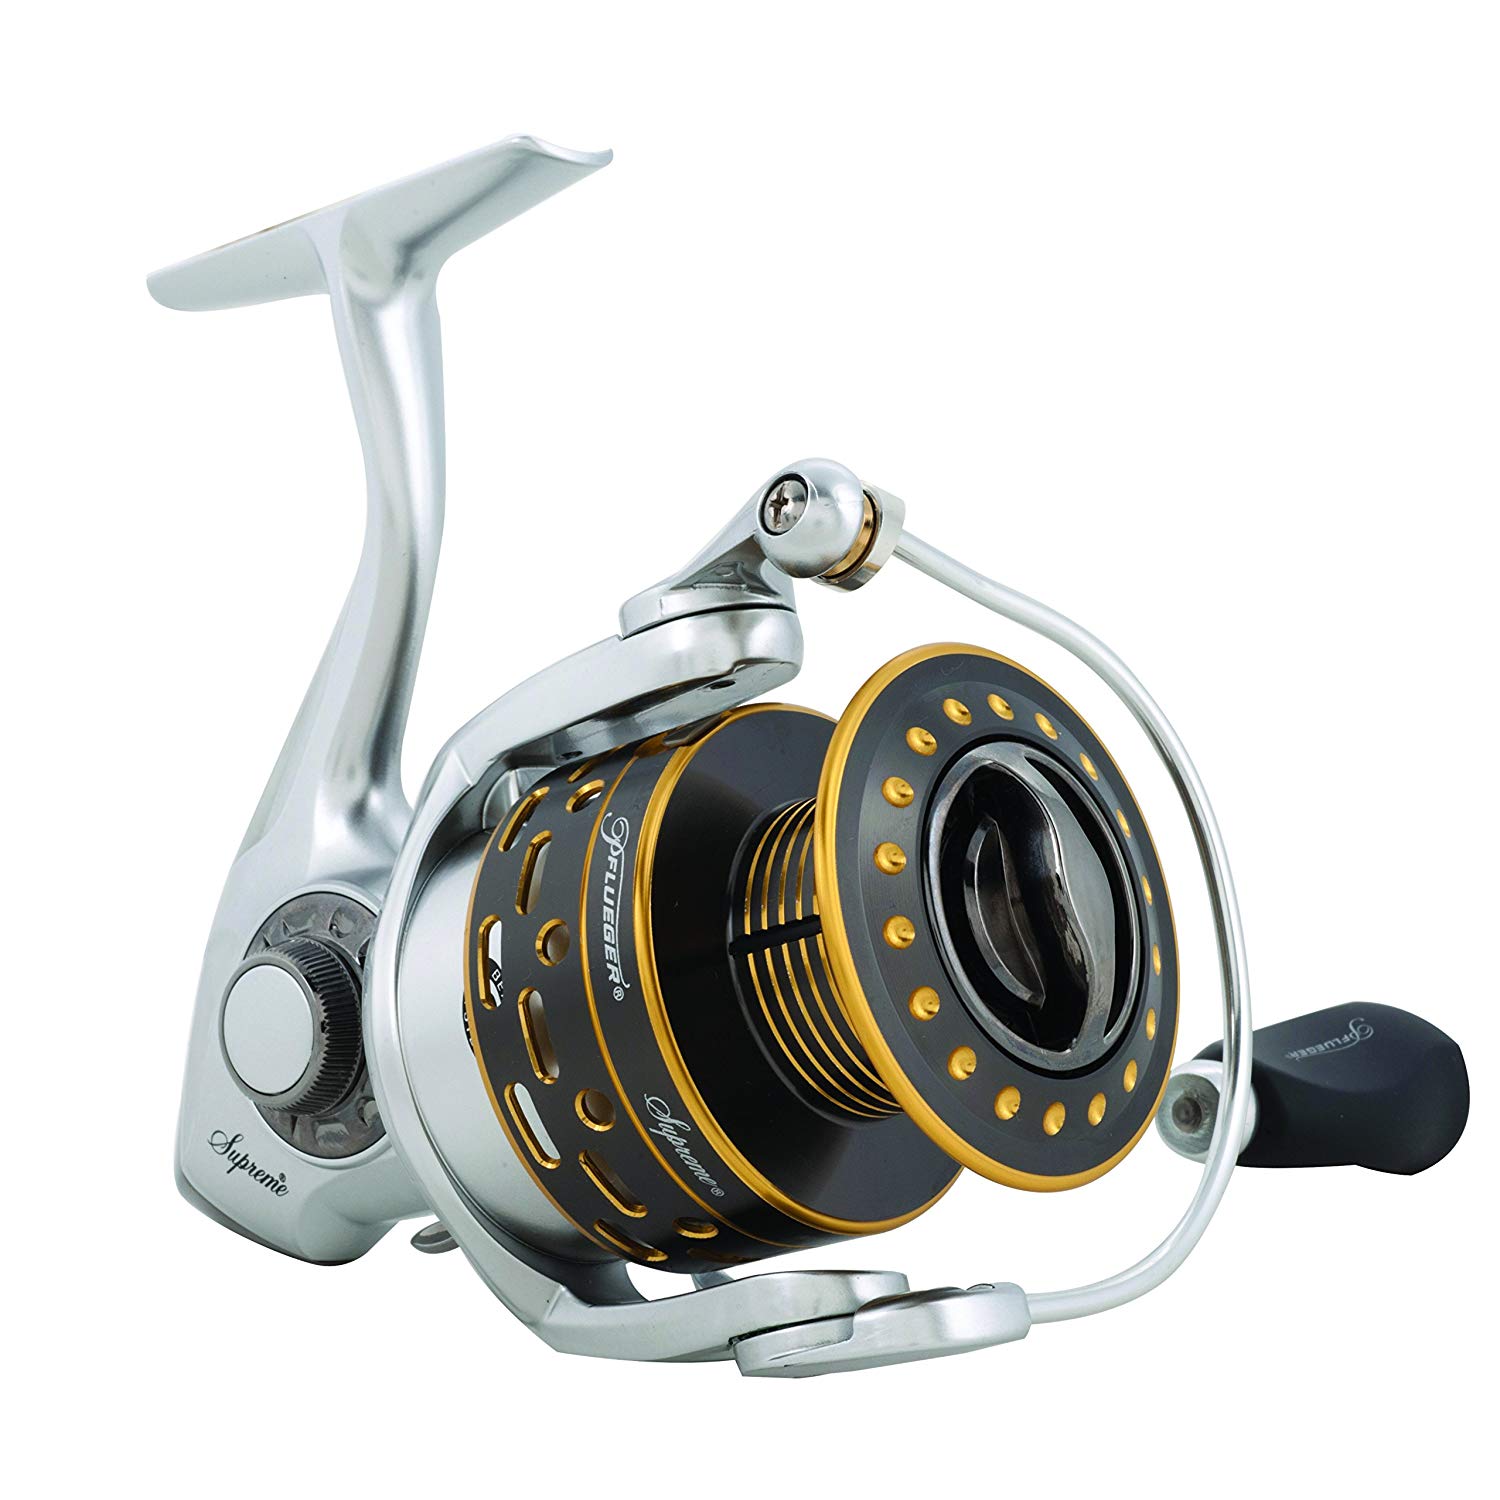 Best Spinning Reels Reviewed & Rated for Quality TheGearHunt